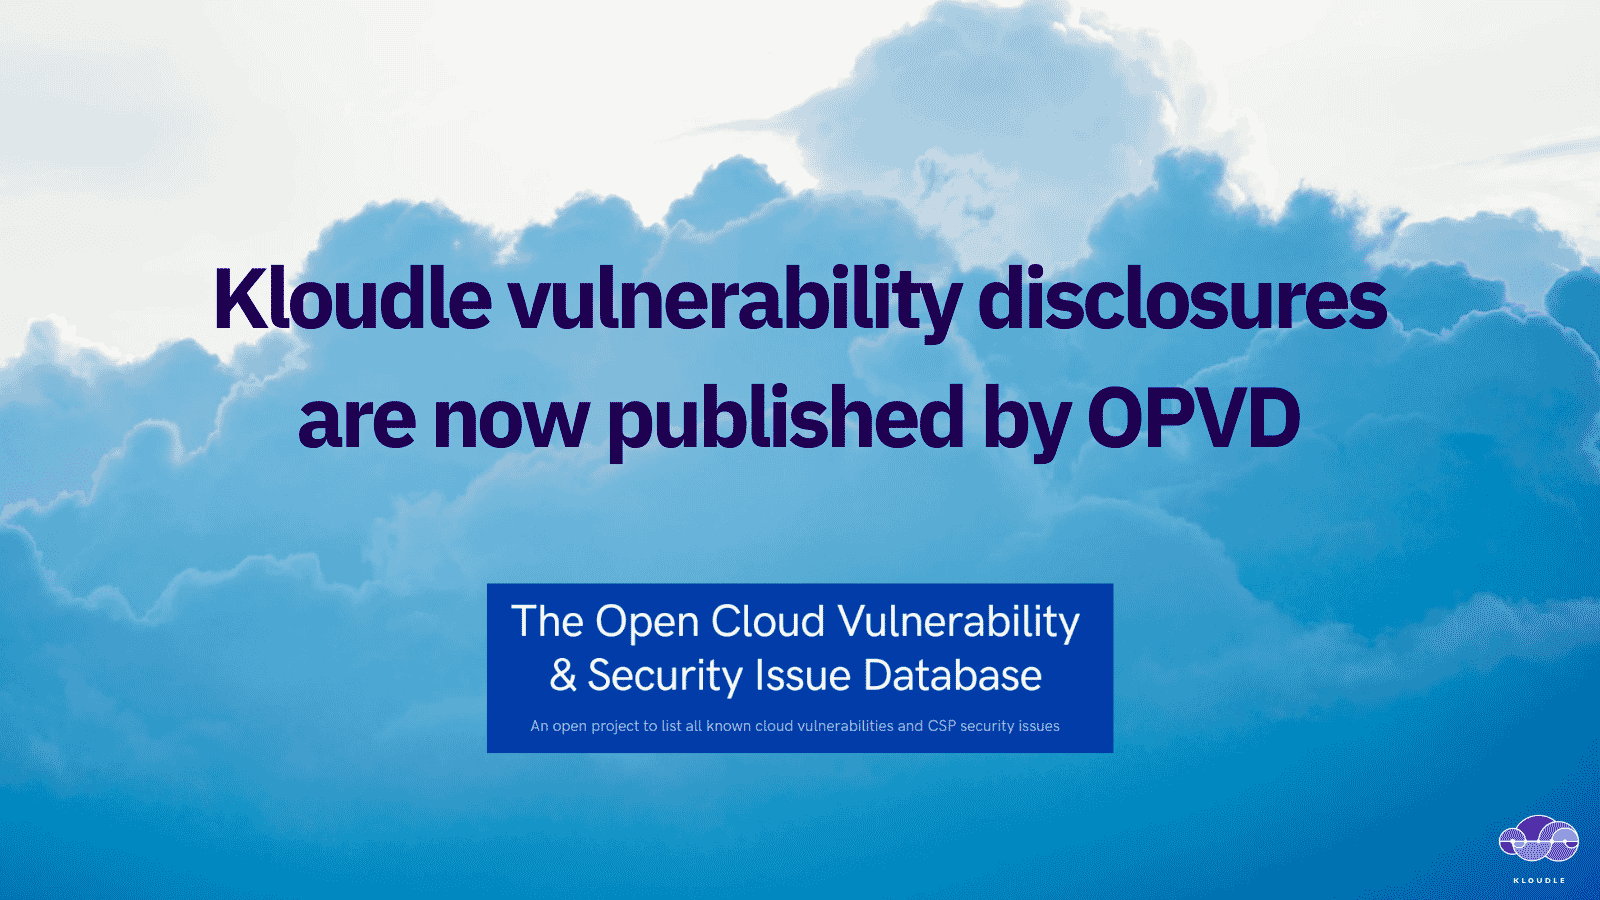 Kloudle vulnerability disclosures are now published by Open Cloud Vulnerability & Security Issue Database (OPVD)